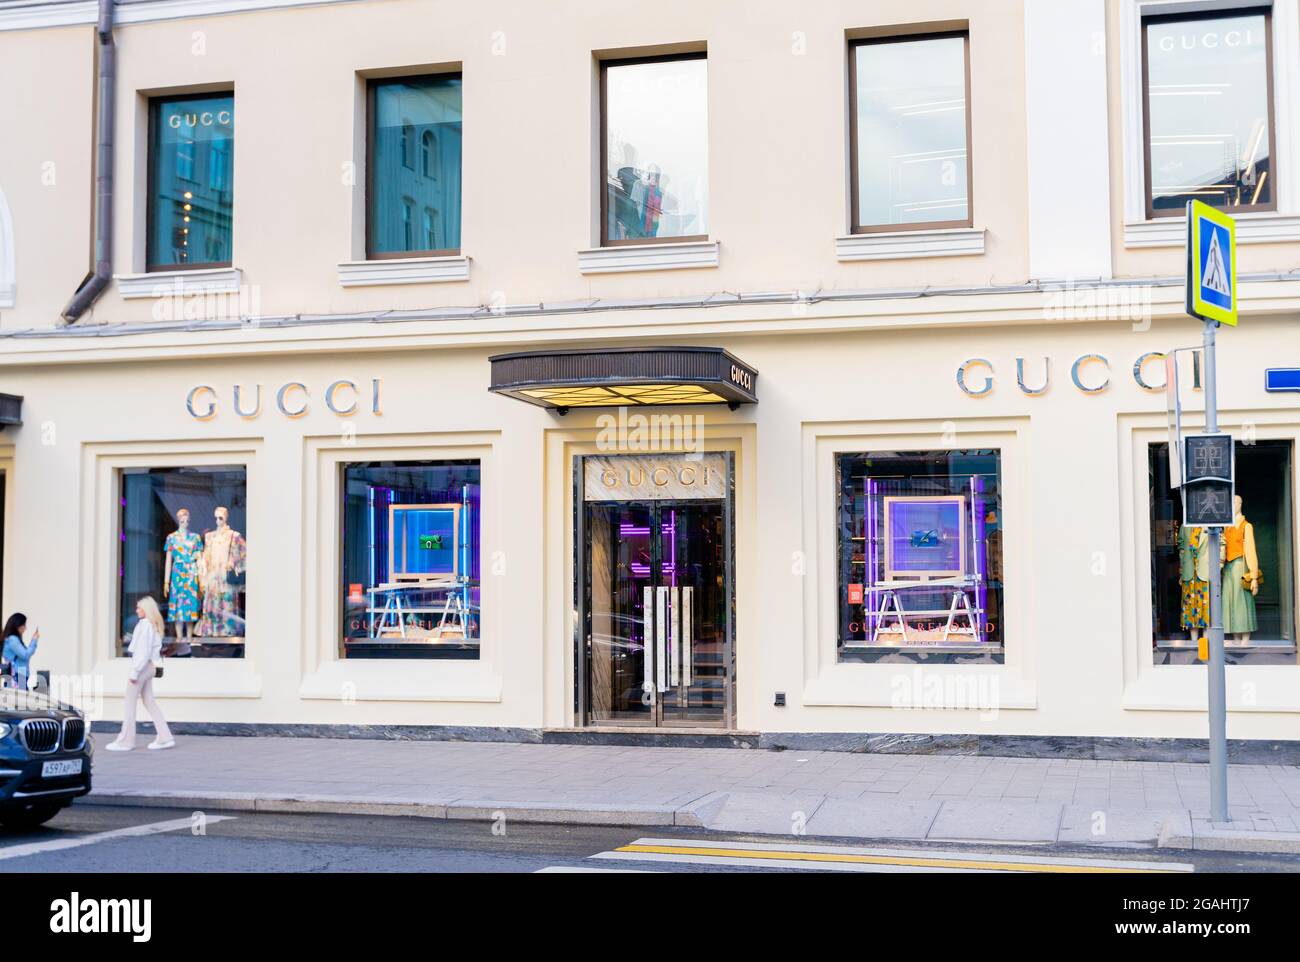 GUCCI store front, Petrovka str, Moscow, Russia Stock Photo - Alamy